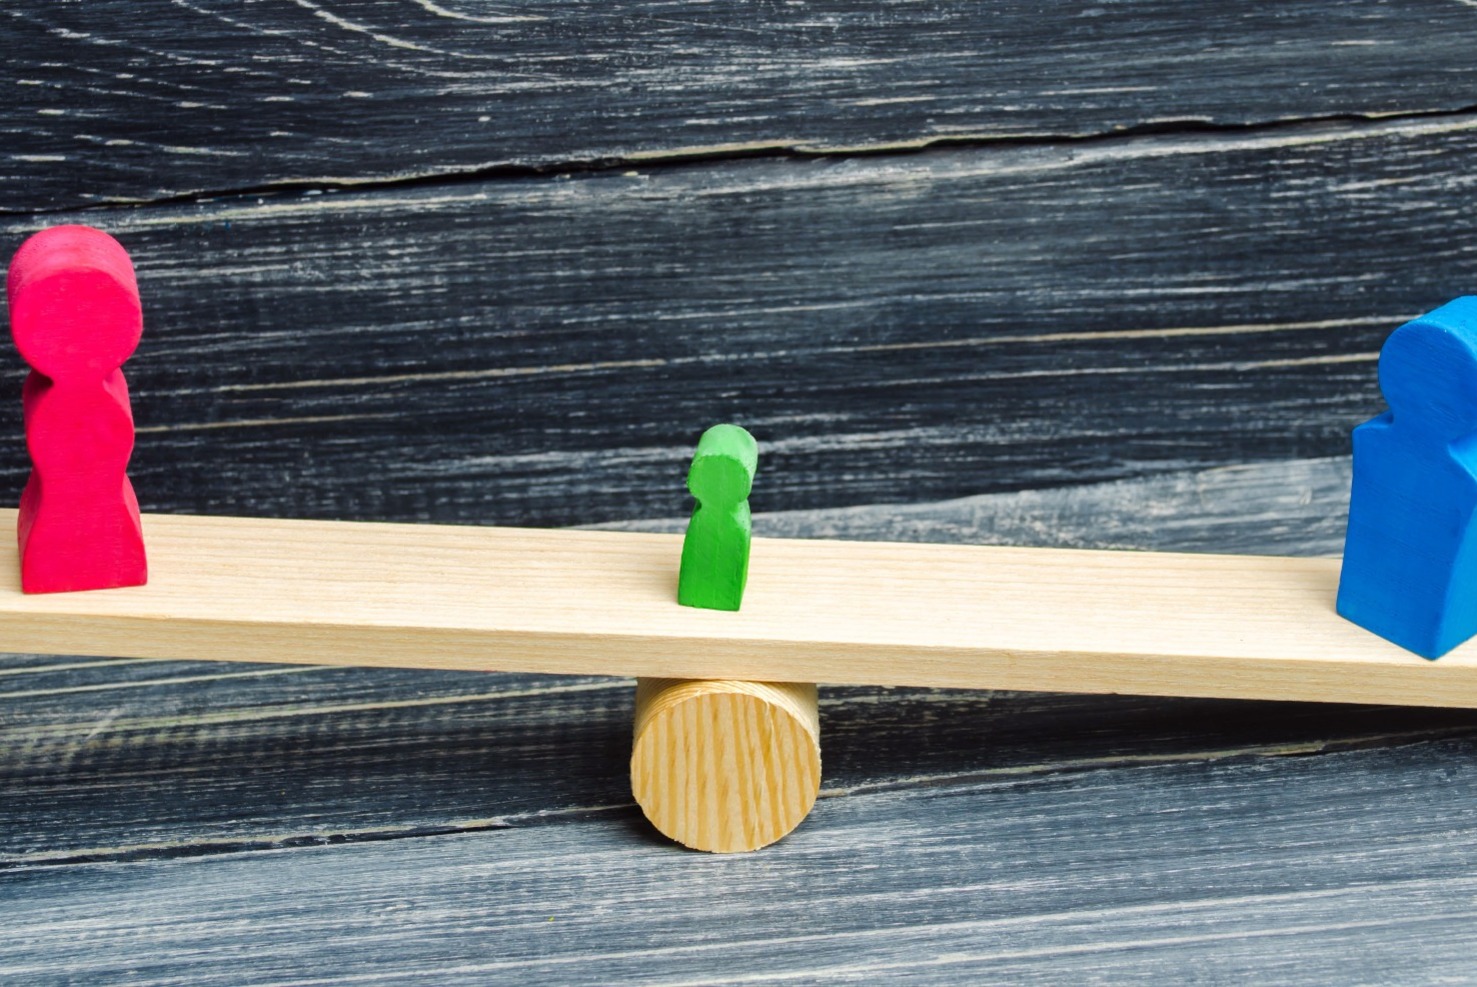 A wooden see-saw, with a pink figure on one end,a blue figure on the other, and a small green figure in the middle.